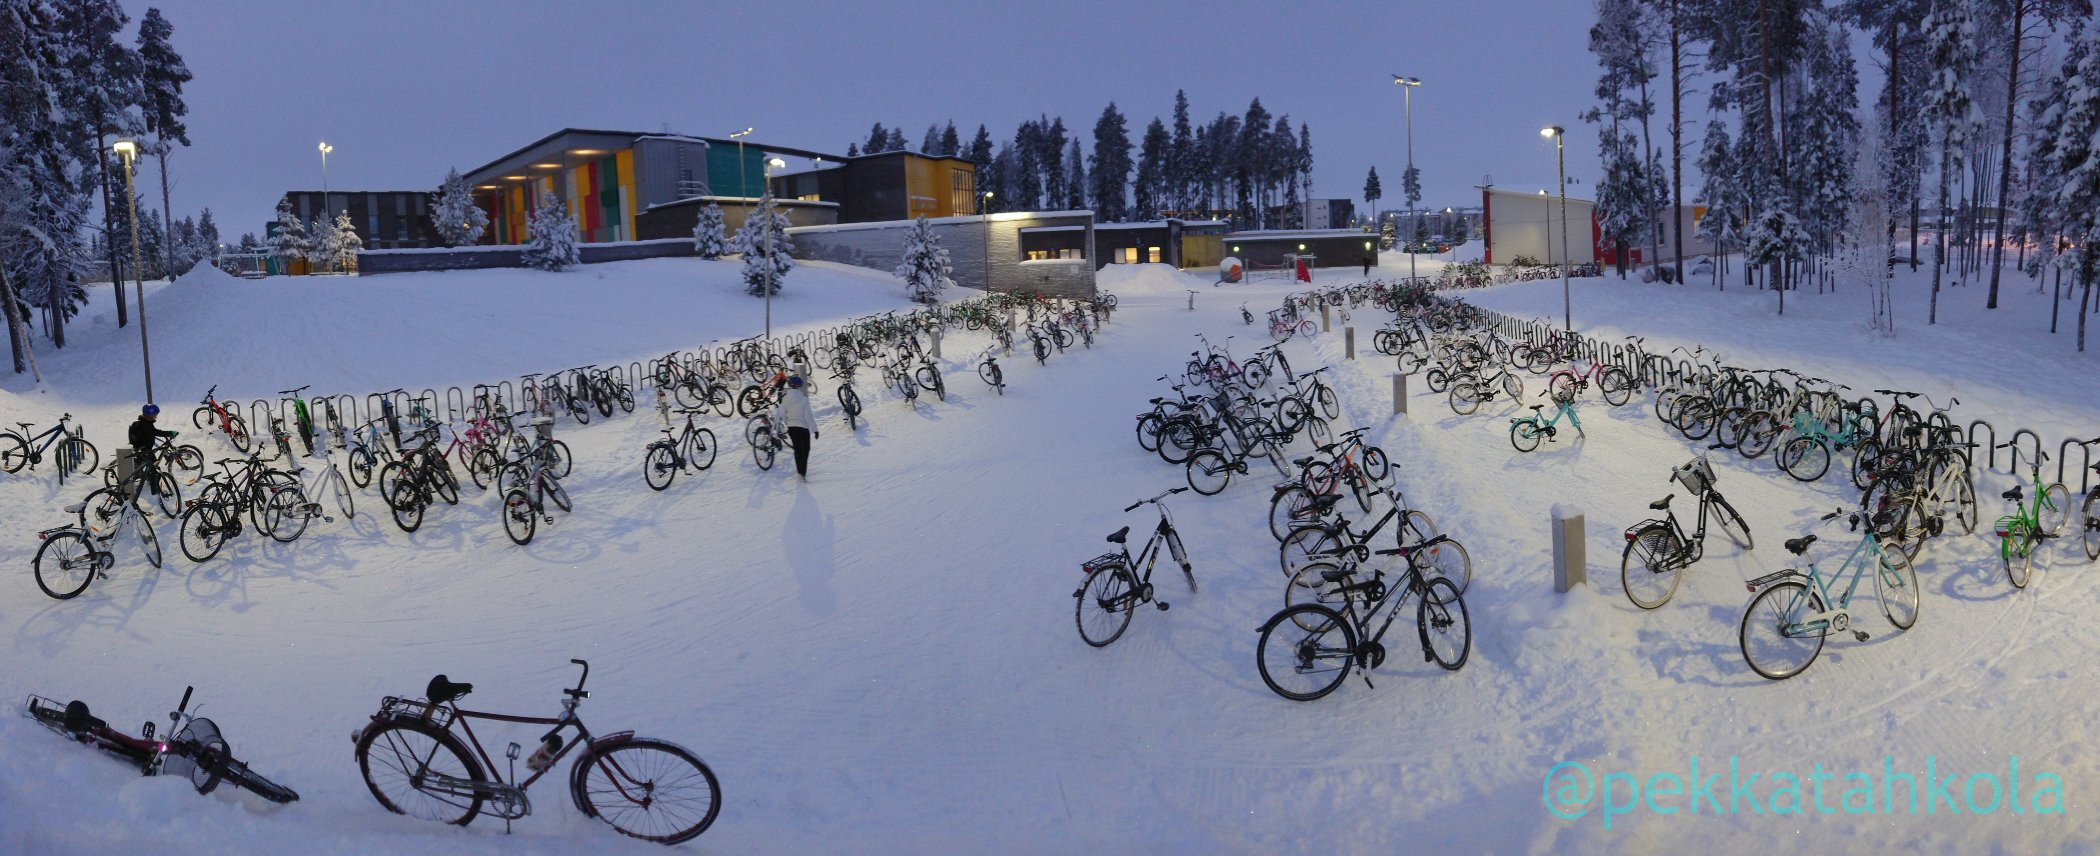 Hundreds of kids' bicycles parked at a schoolyard in snowy winter conditions.